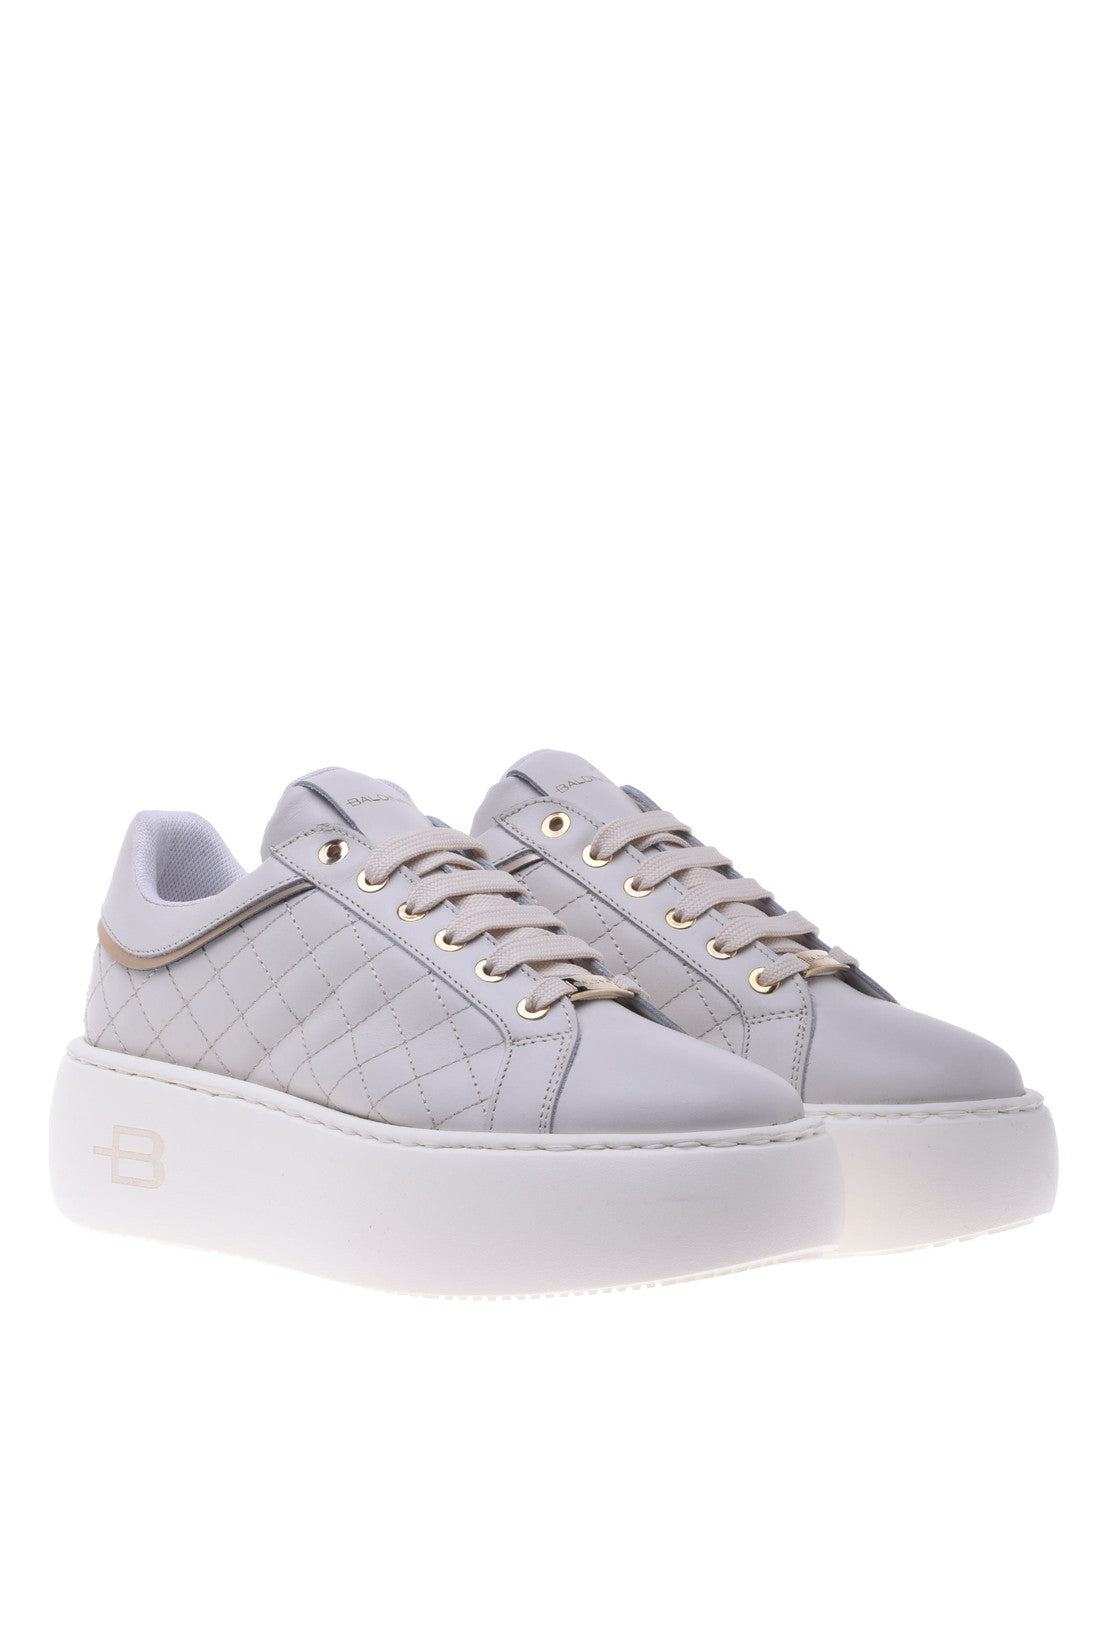 BALDININI-OUTLET-SALE-Sneaker-in-white-quilted-leather-Sneaker-ARCHIVE-COLLECTION-3.jpg